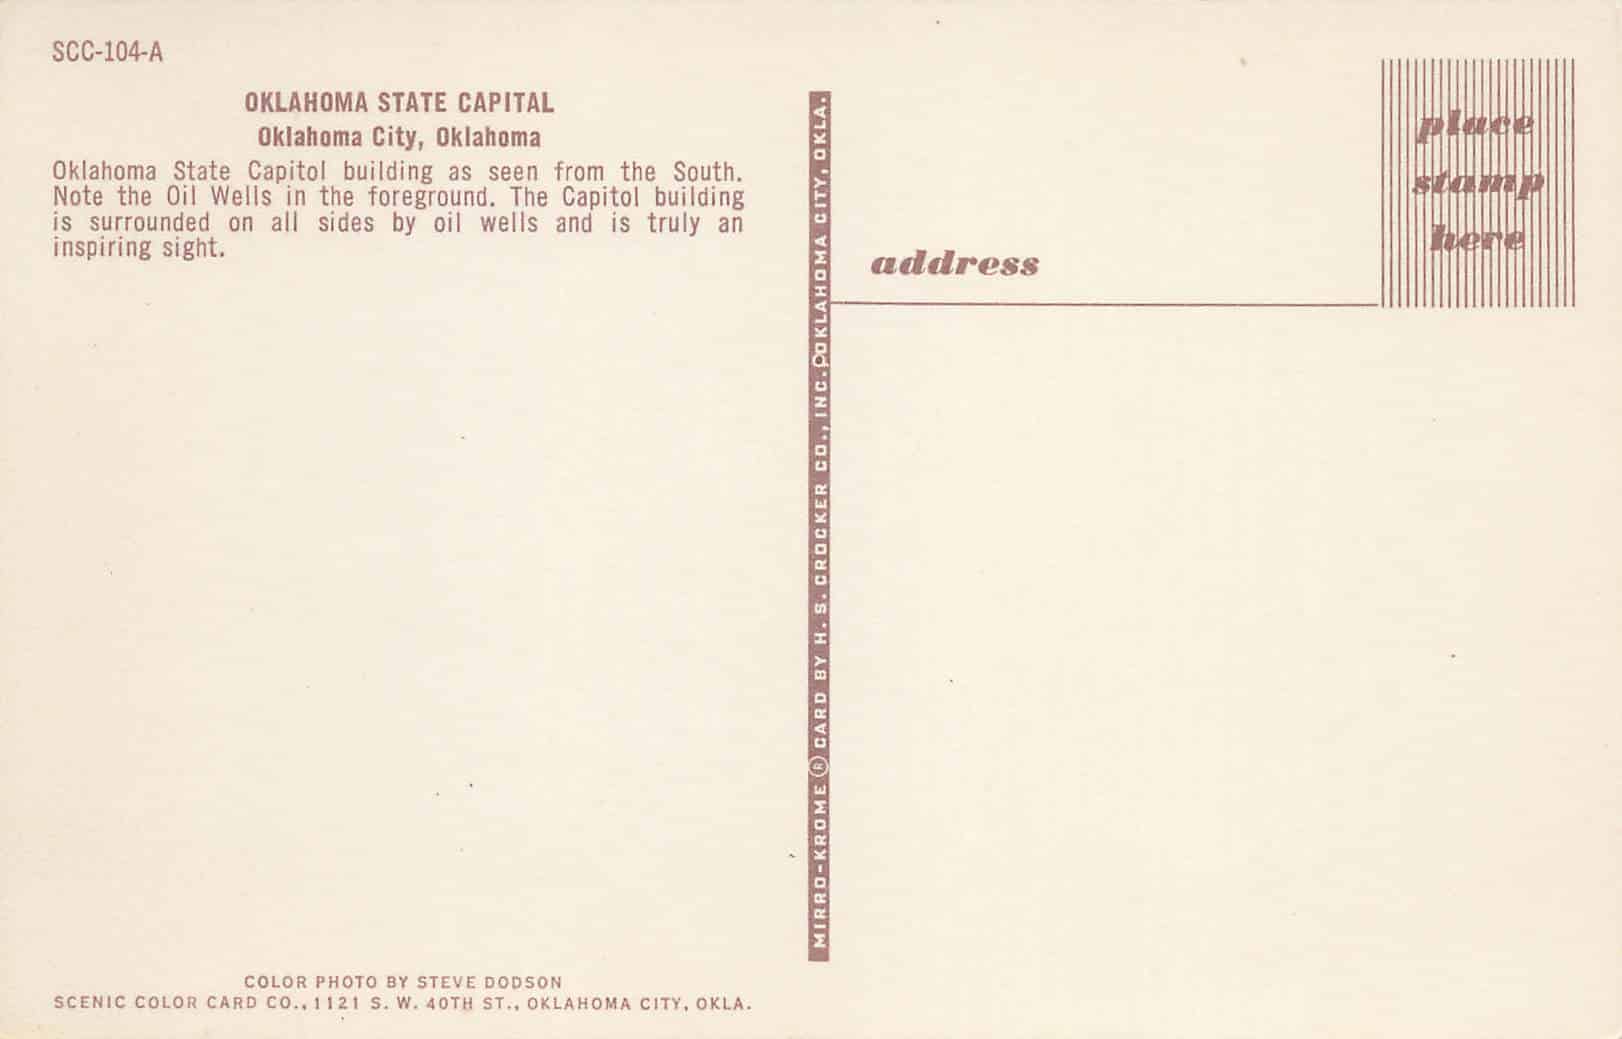 Postcard back that states that the capitol is surrounded on all sides by oil wells.